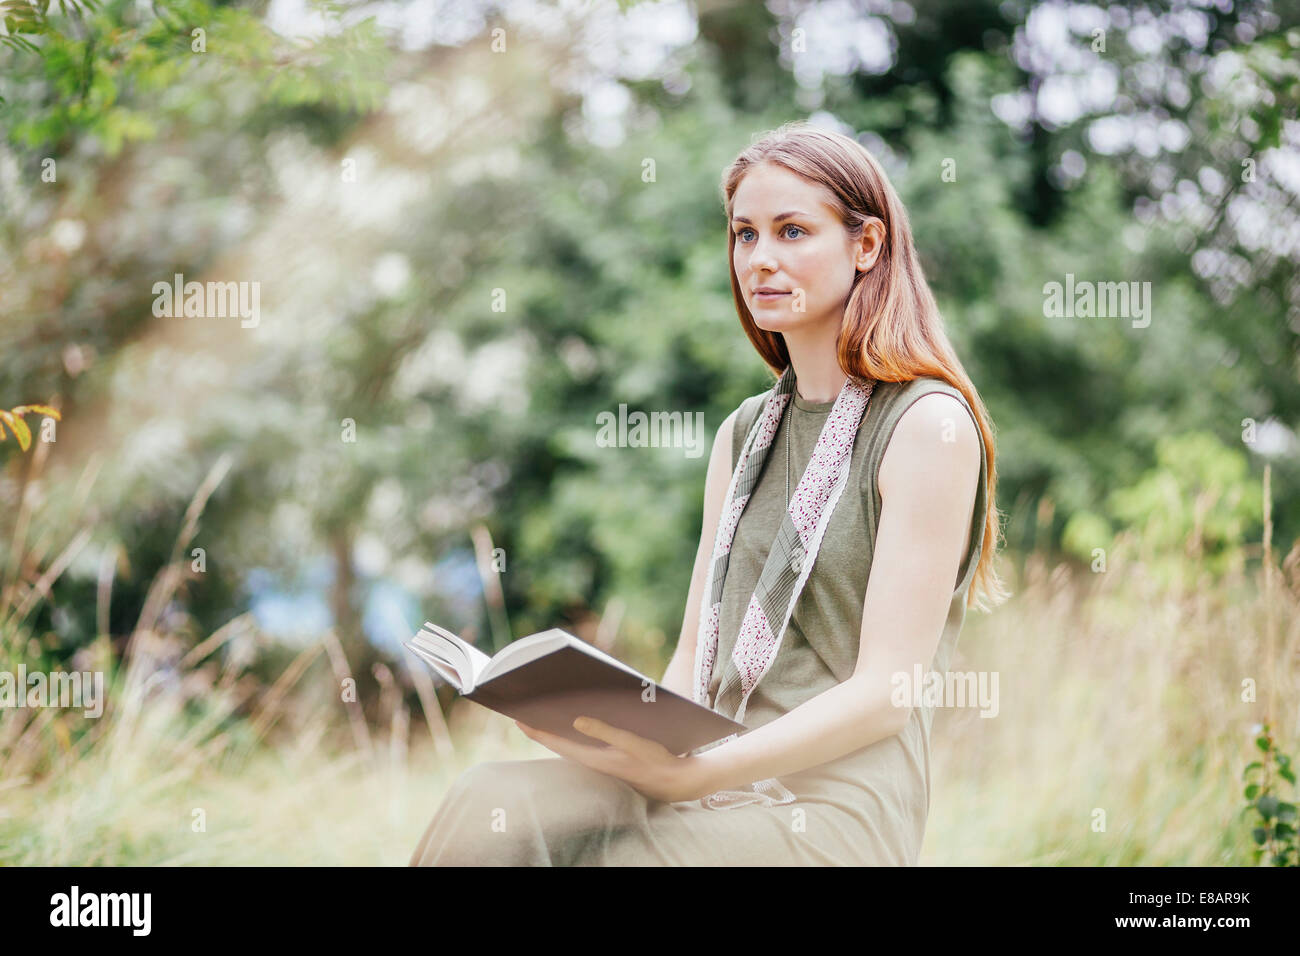 Young woman in field distracted from reading book Stock Photo